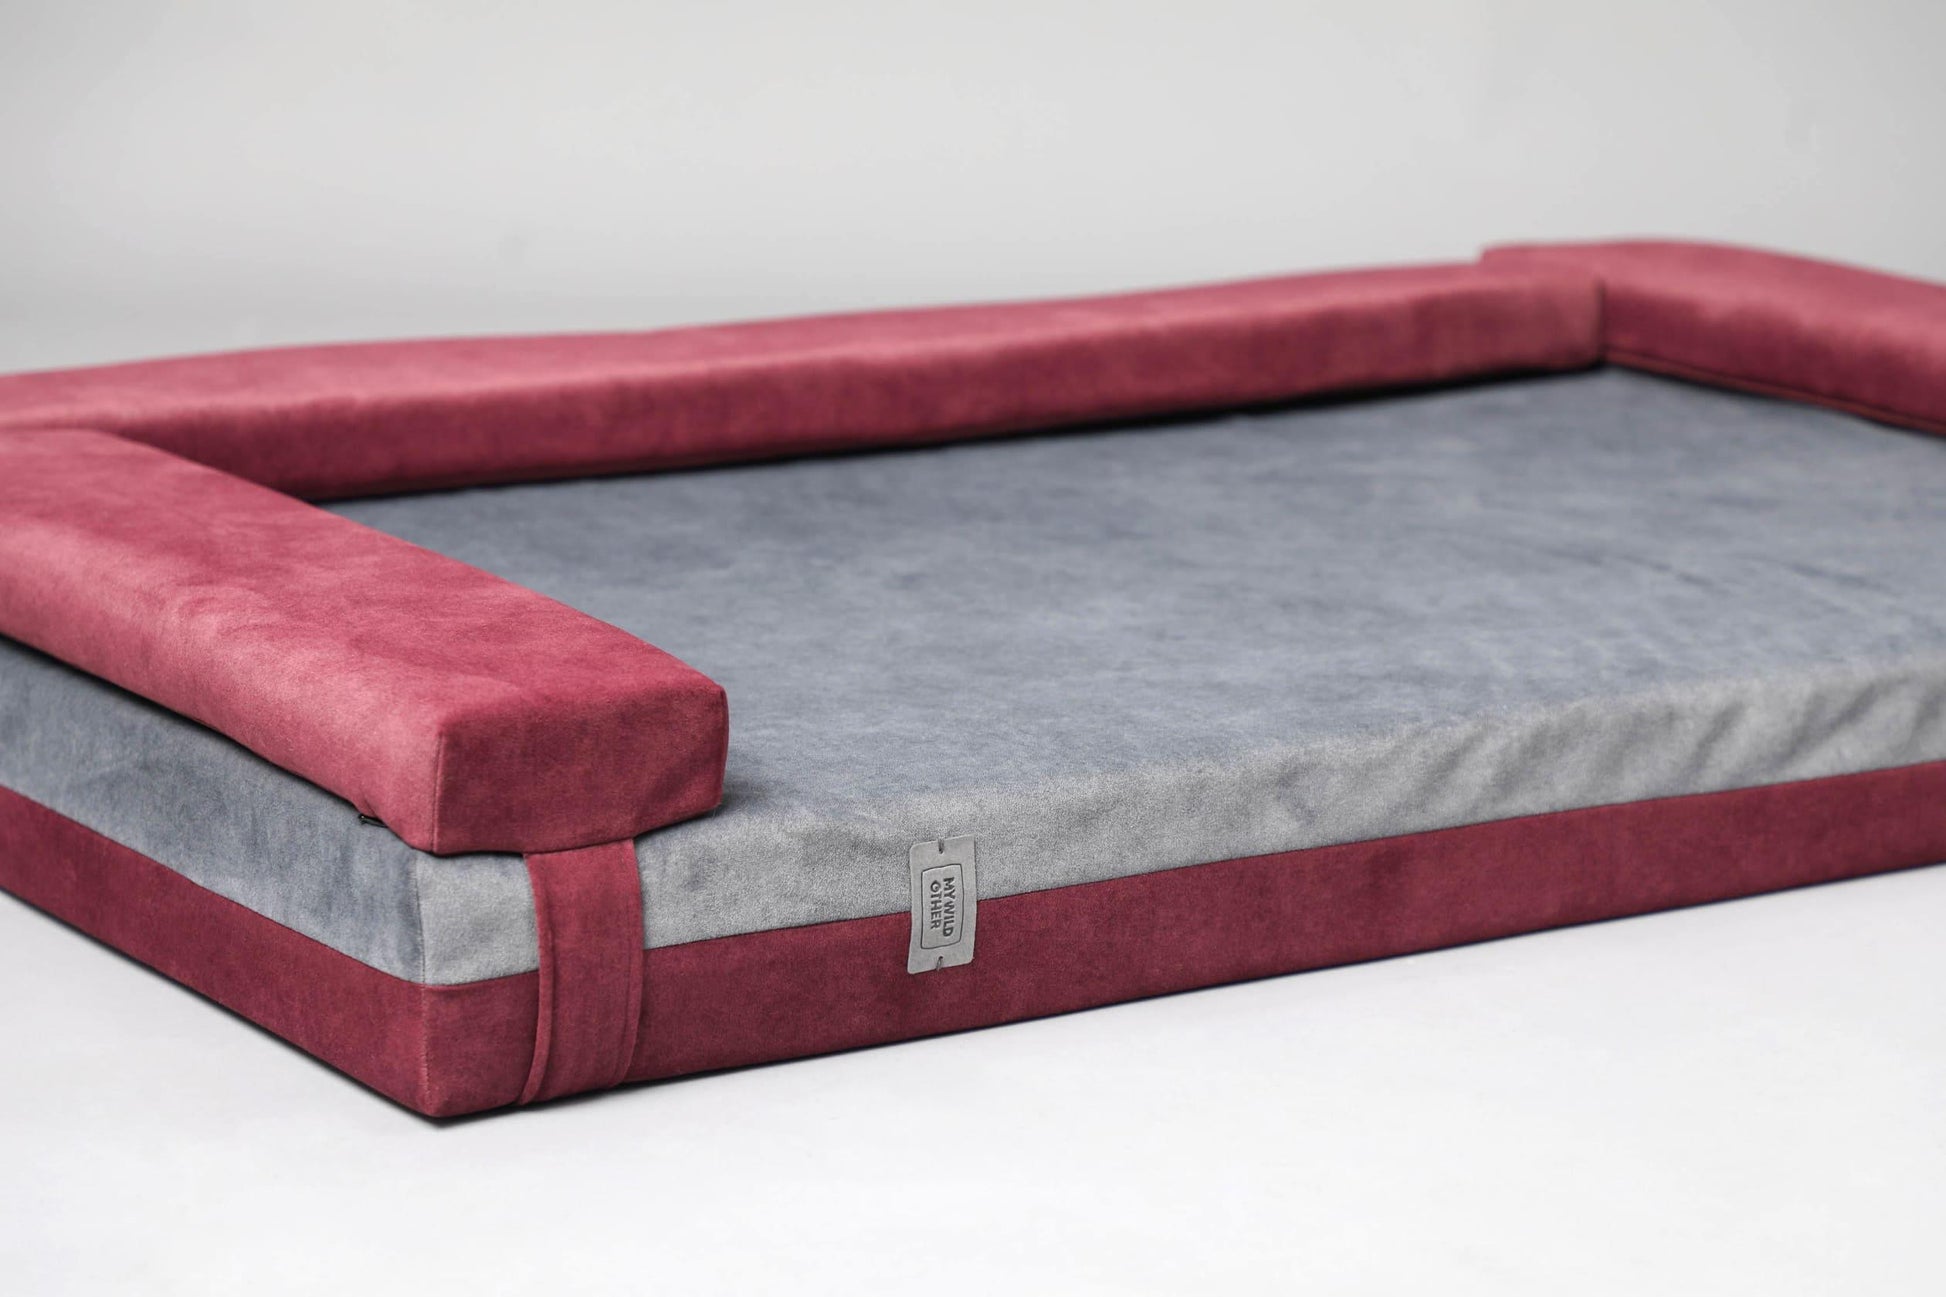 Transformer dog bed | Extra comfort & support | 2-sided | WINE RED+STEEL GREY - premium dog goods handmade in Europe by My Wild Other